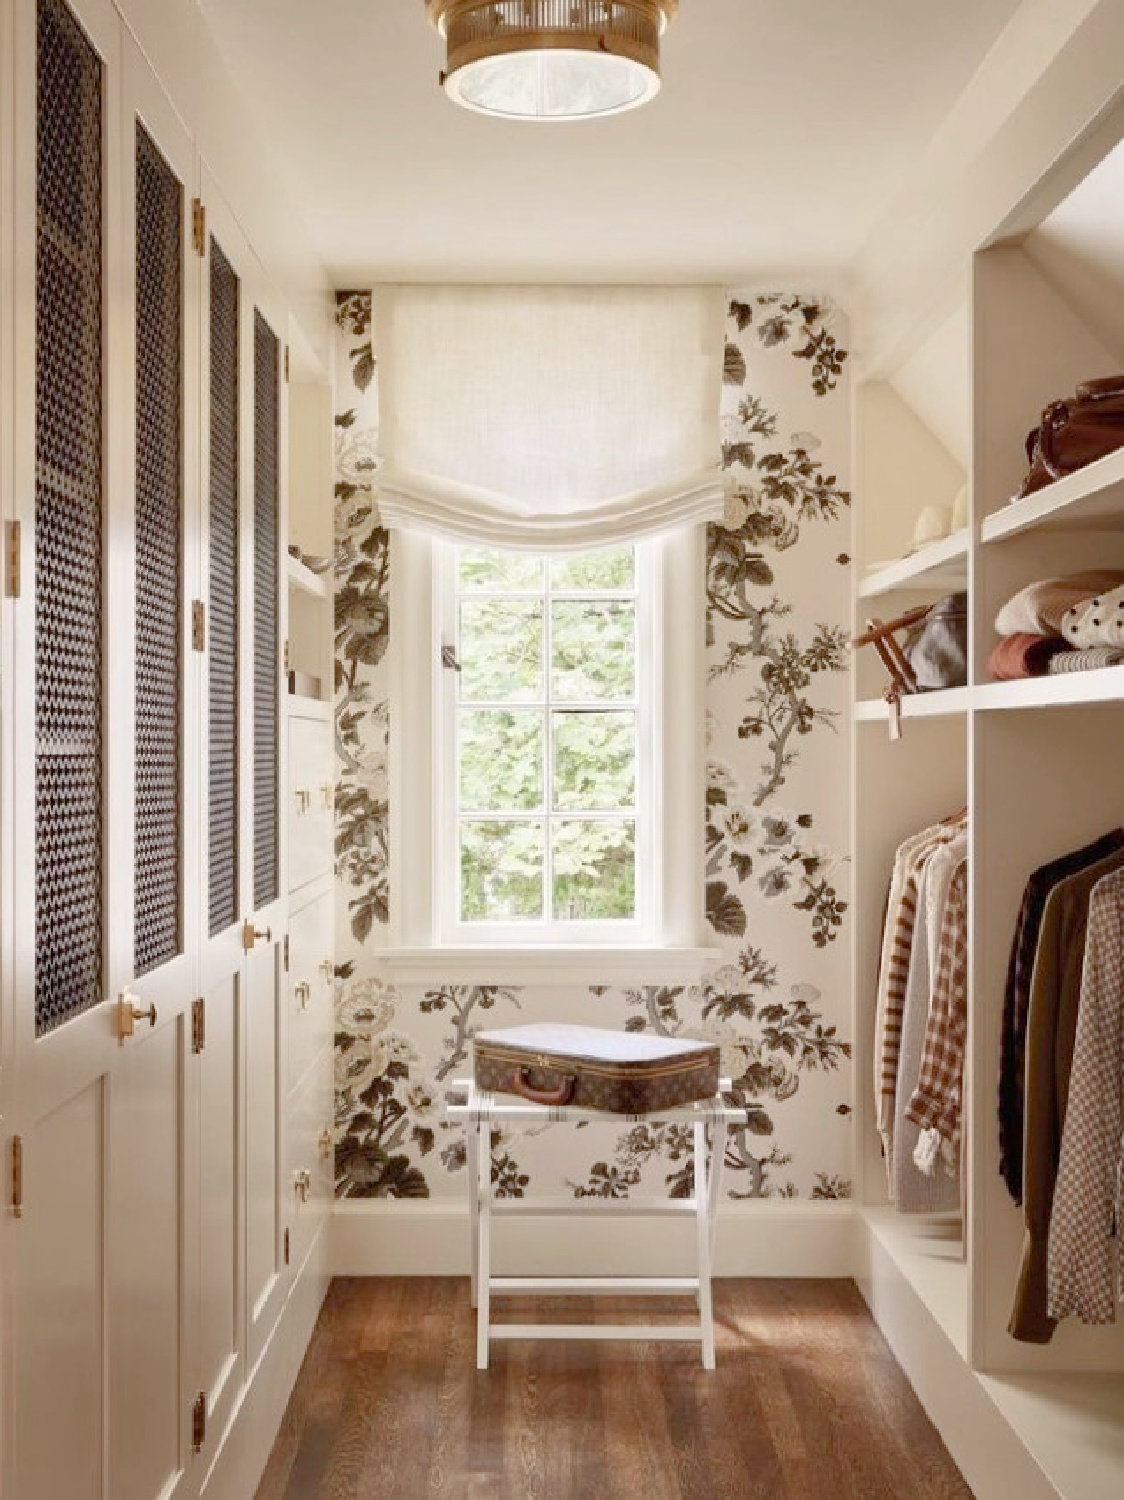 Katie Rosenfeld designed customized walk-in closet with Schumacher Pyne Hollyhock wallpaper and bespoke cabinetry. #customizedclosets #pynehollyhock